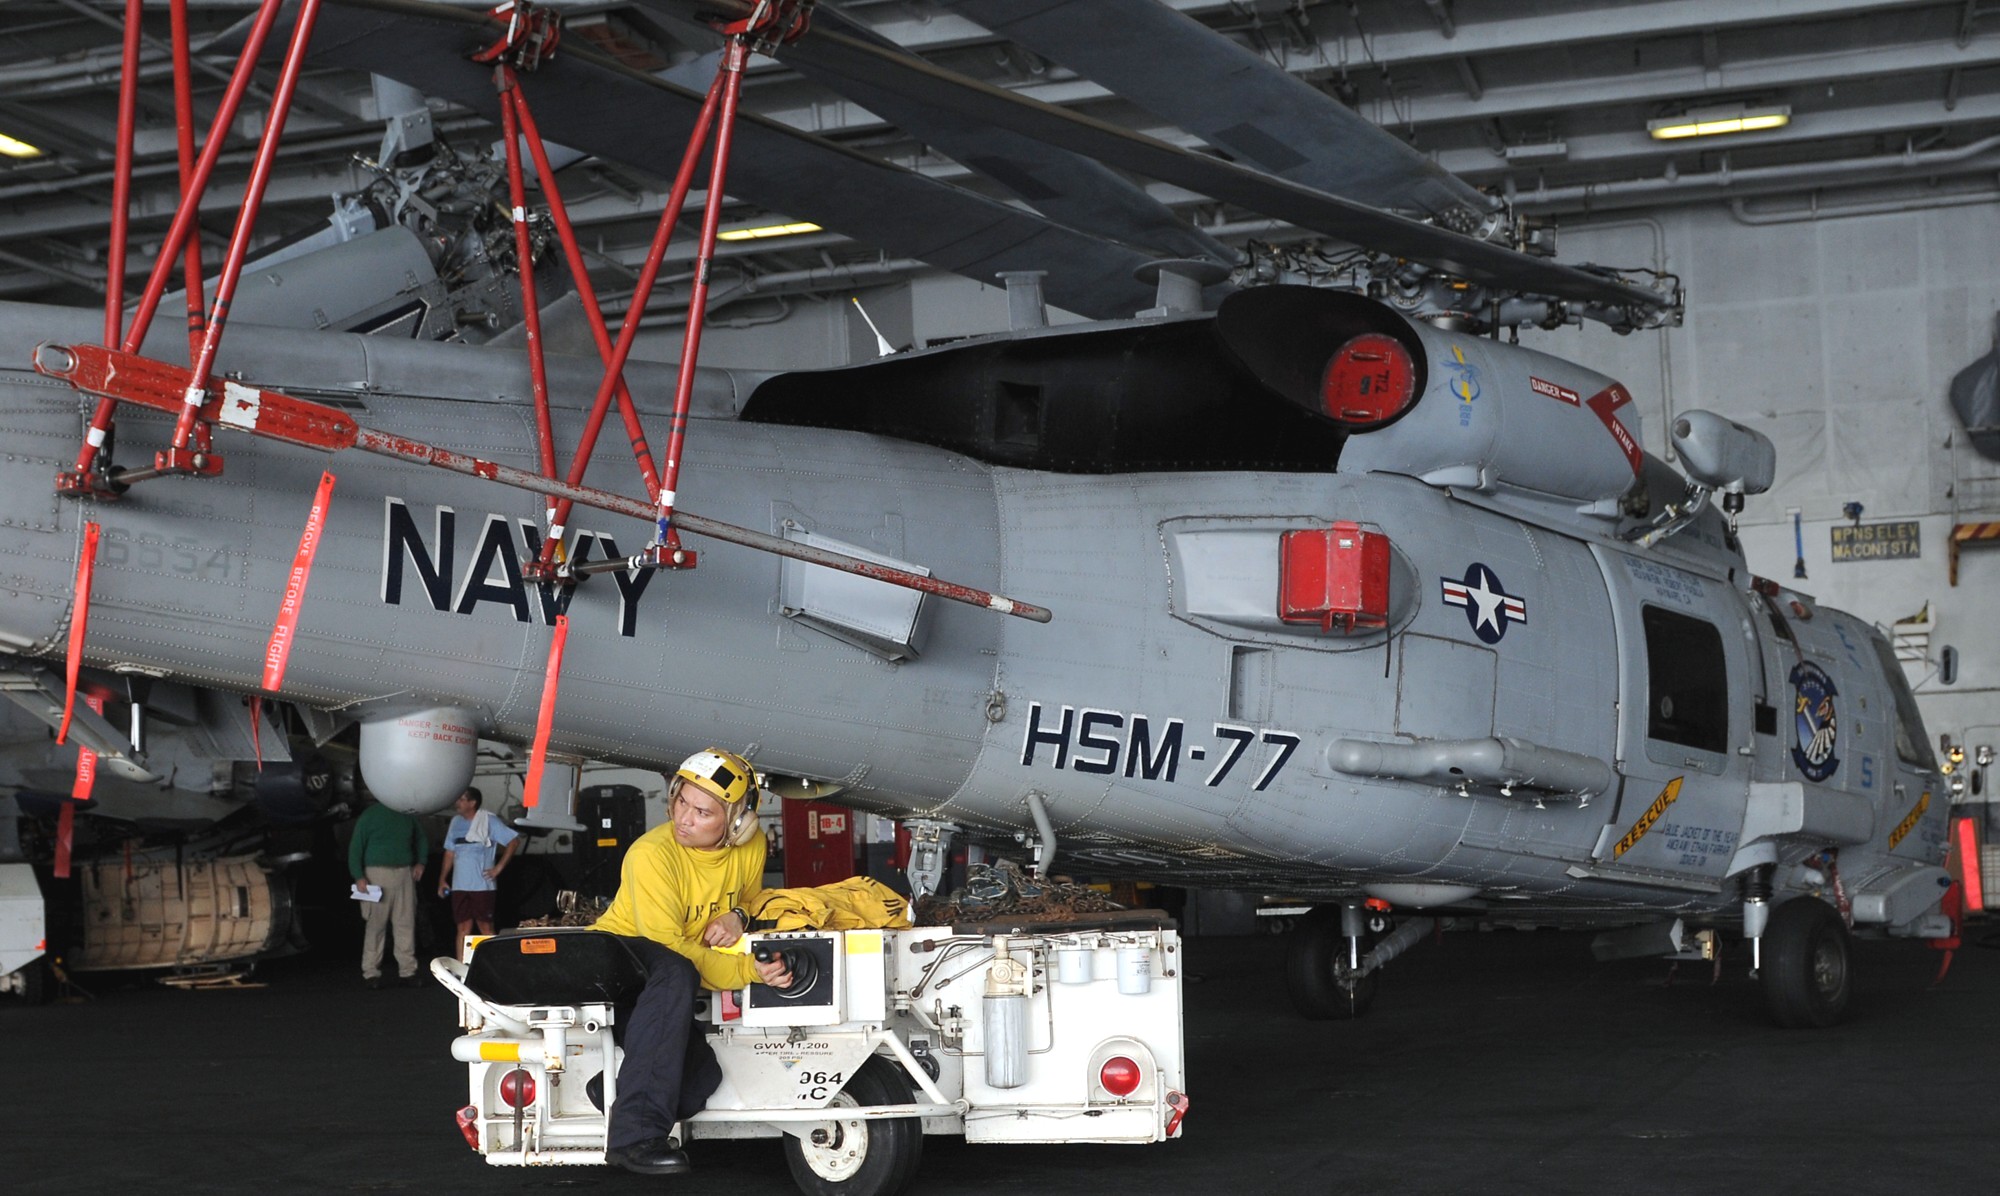 hsm-77 saberhawks helicopter maritime strike squadron mh-60r seahawk us navy 2012 32 uss abraham lincoln cvn-72